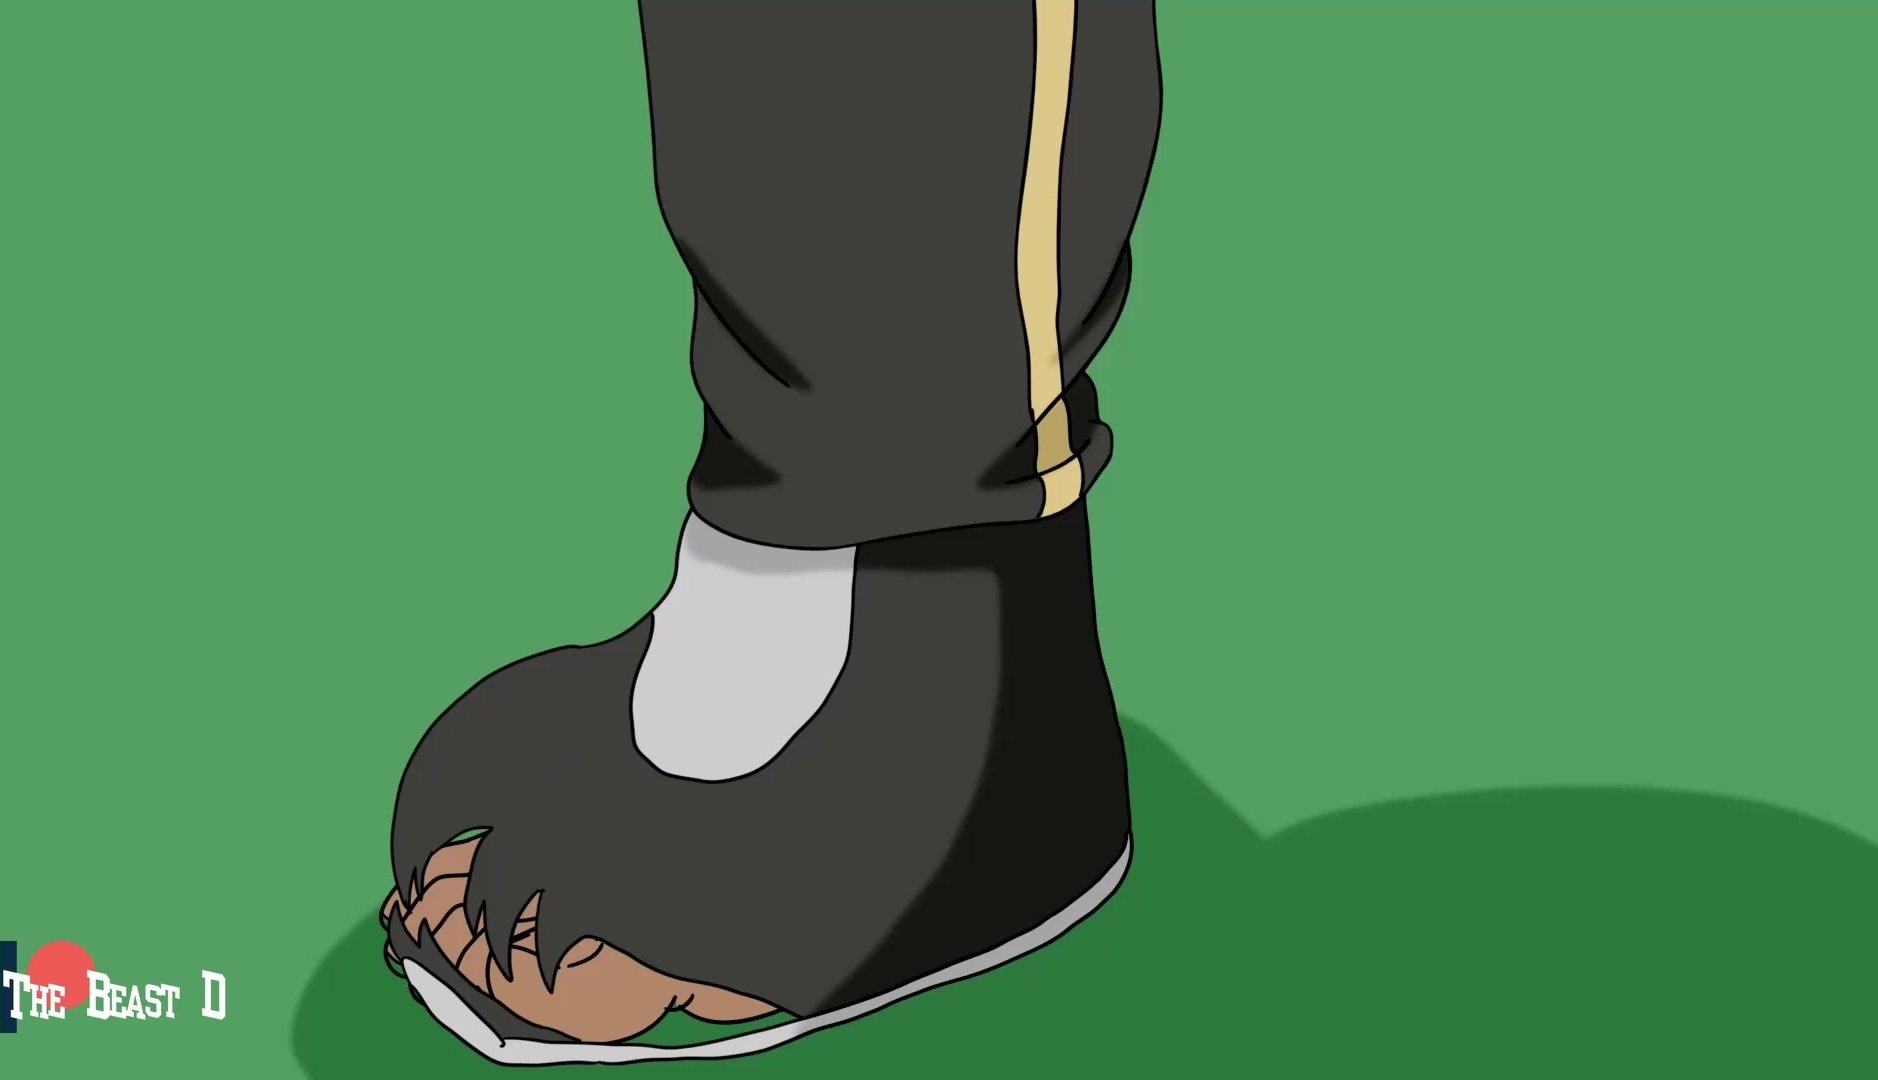 Feet Growth - The Beast D compilation